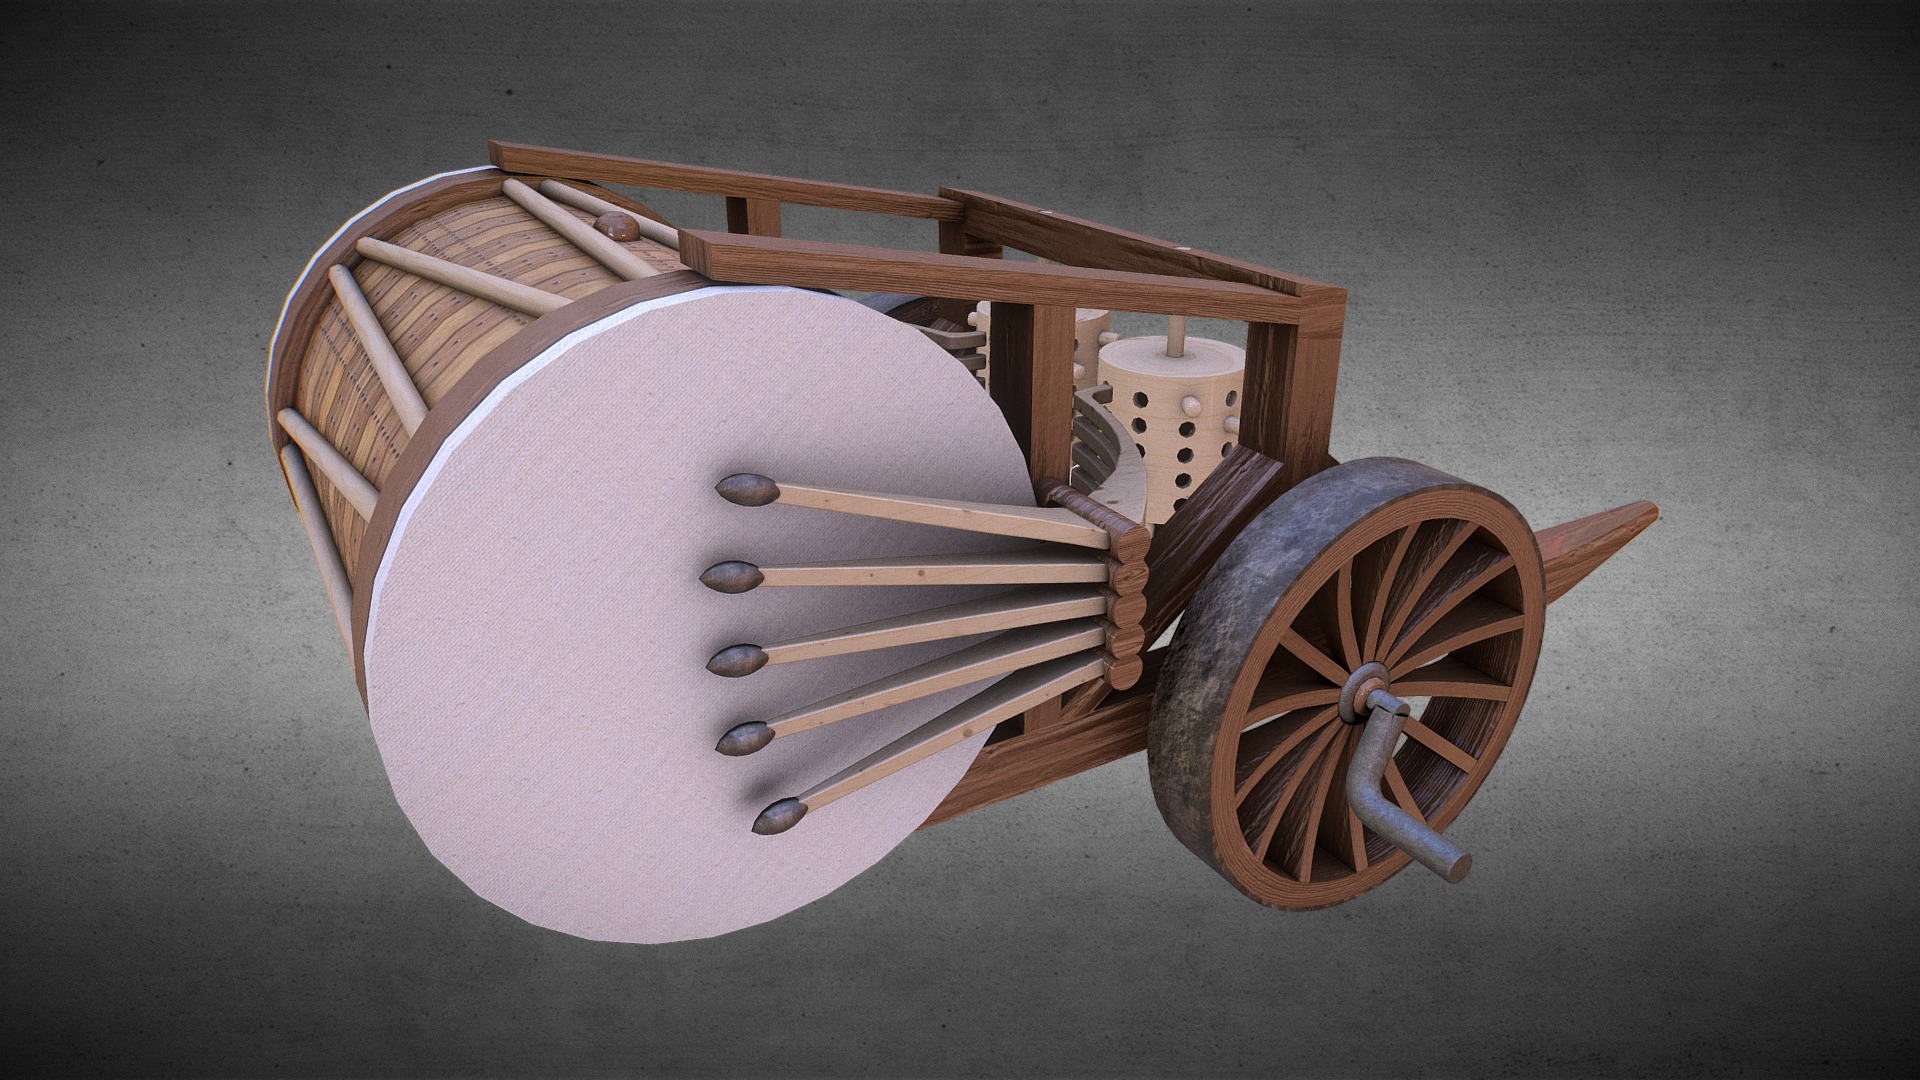 3D model Da Vinci Drum - This is a 3D model of the Da Vinci Drum. The 3D model is about a wooden boat with wheels.